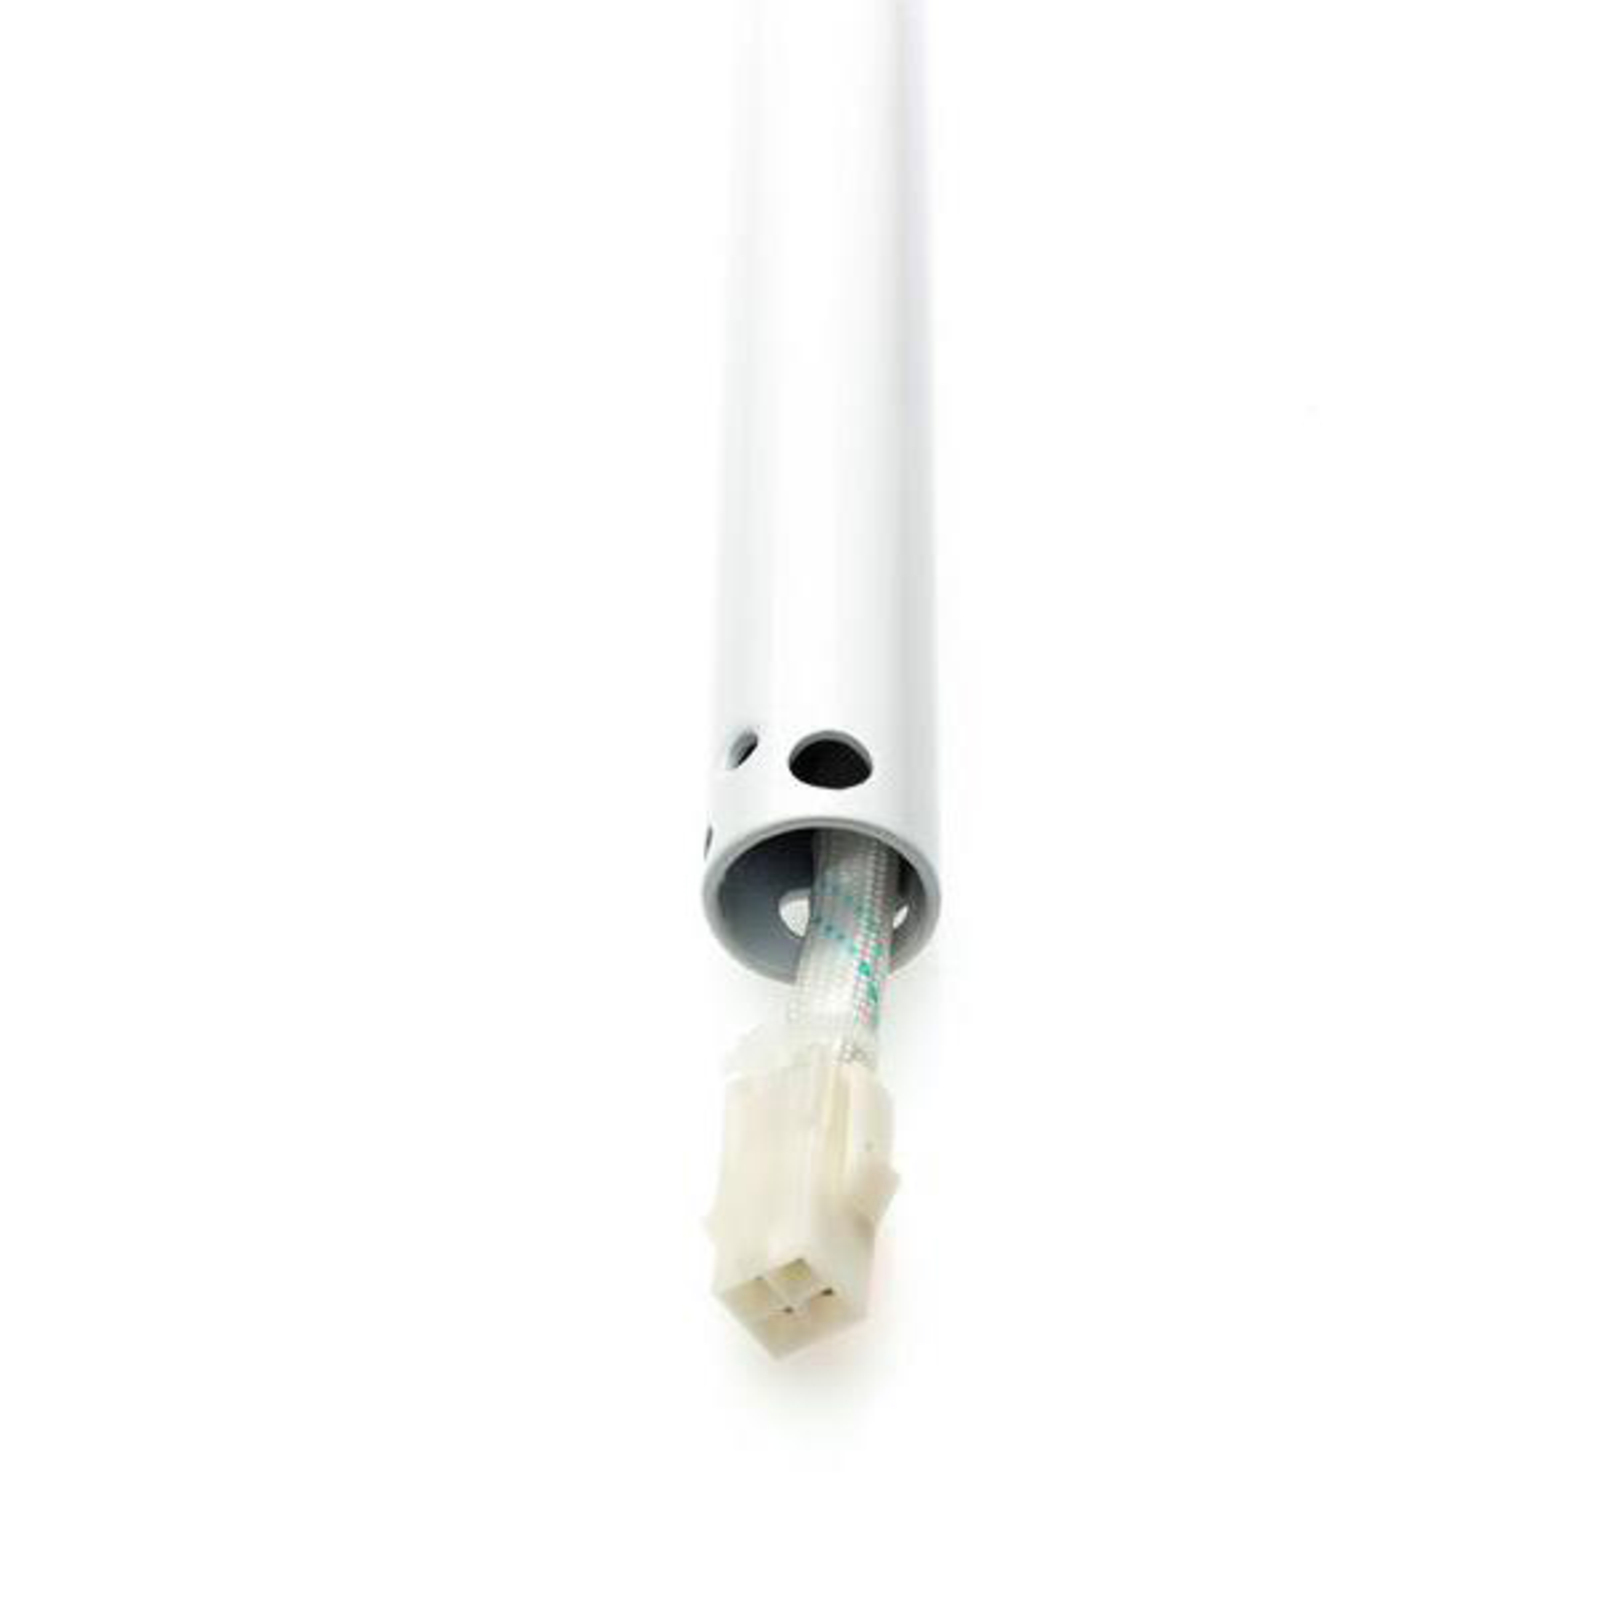 30.5 cm extension rod in white